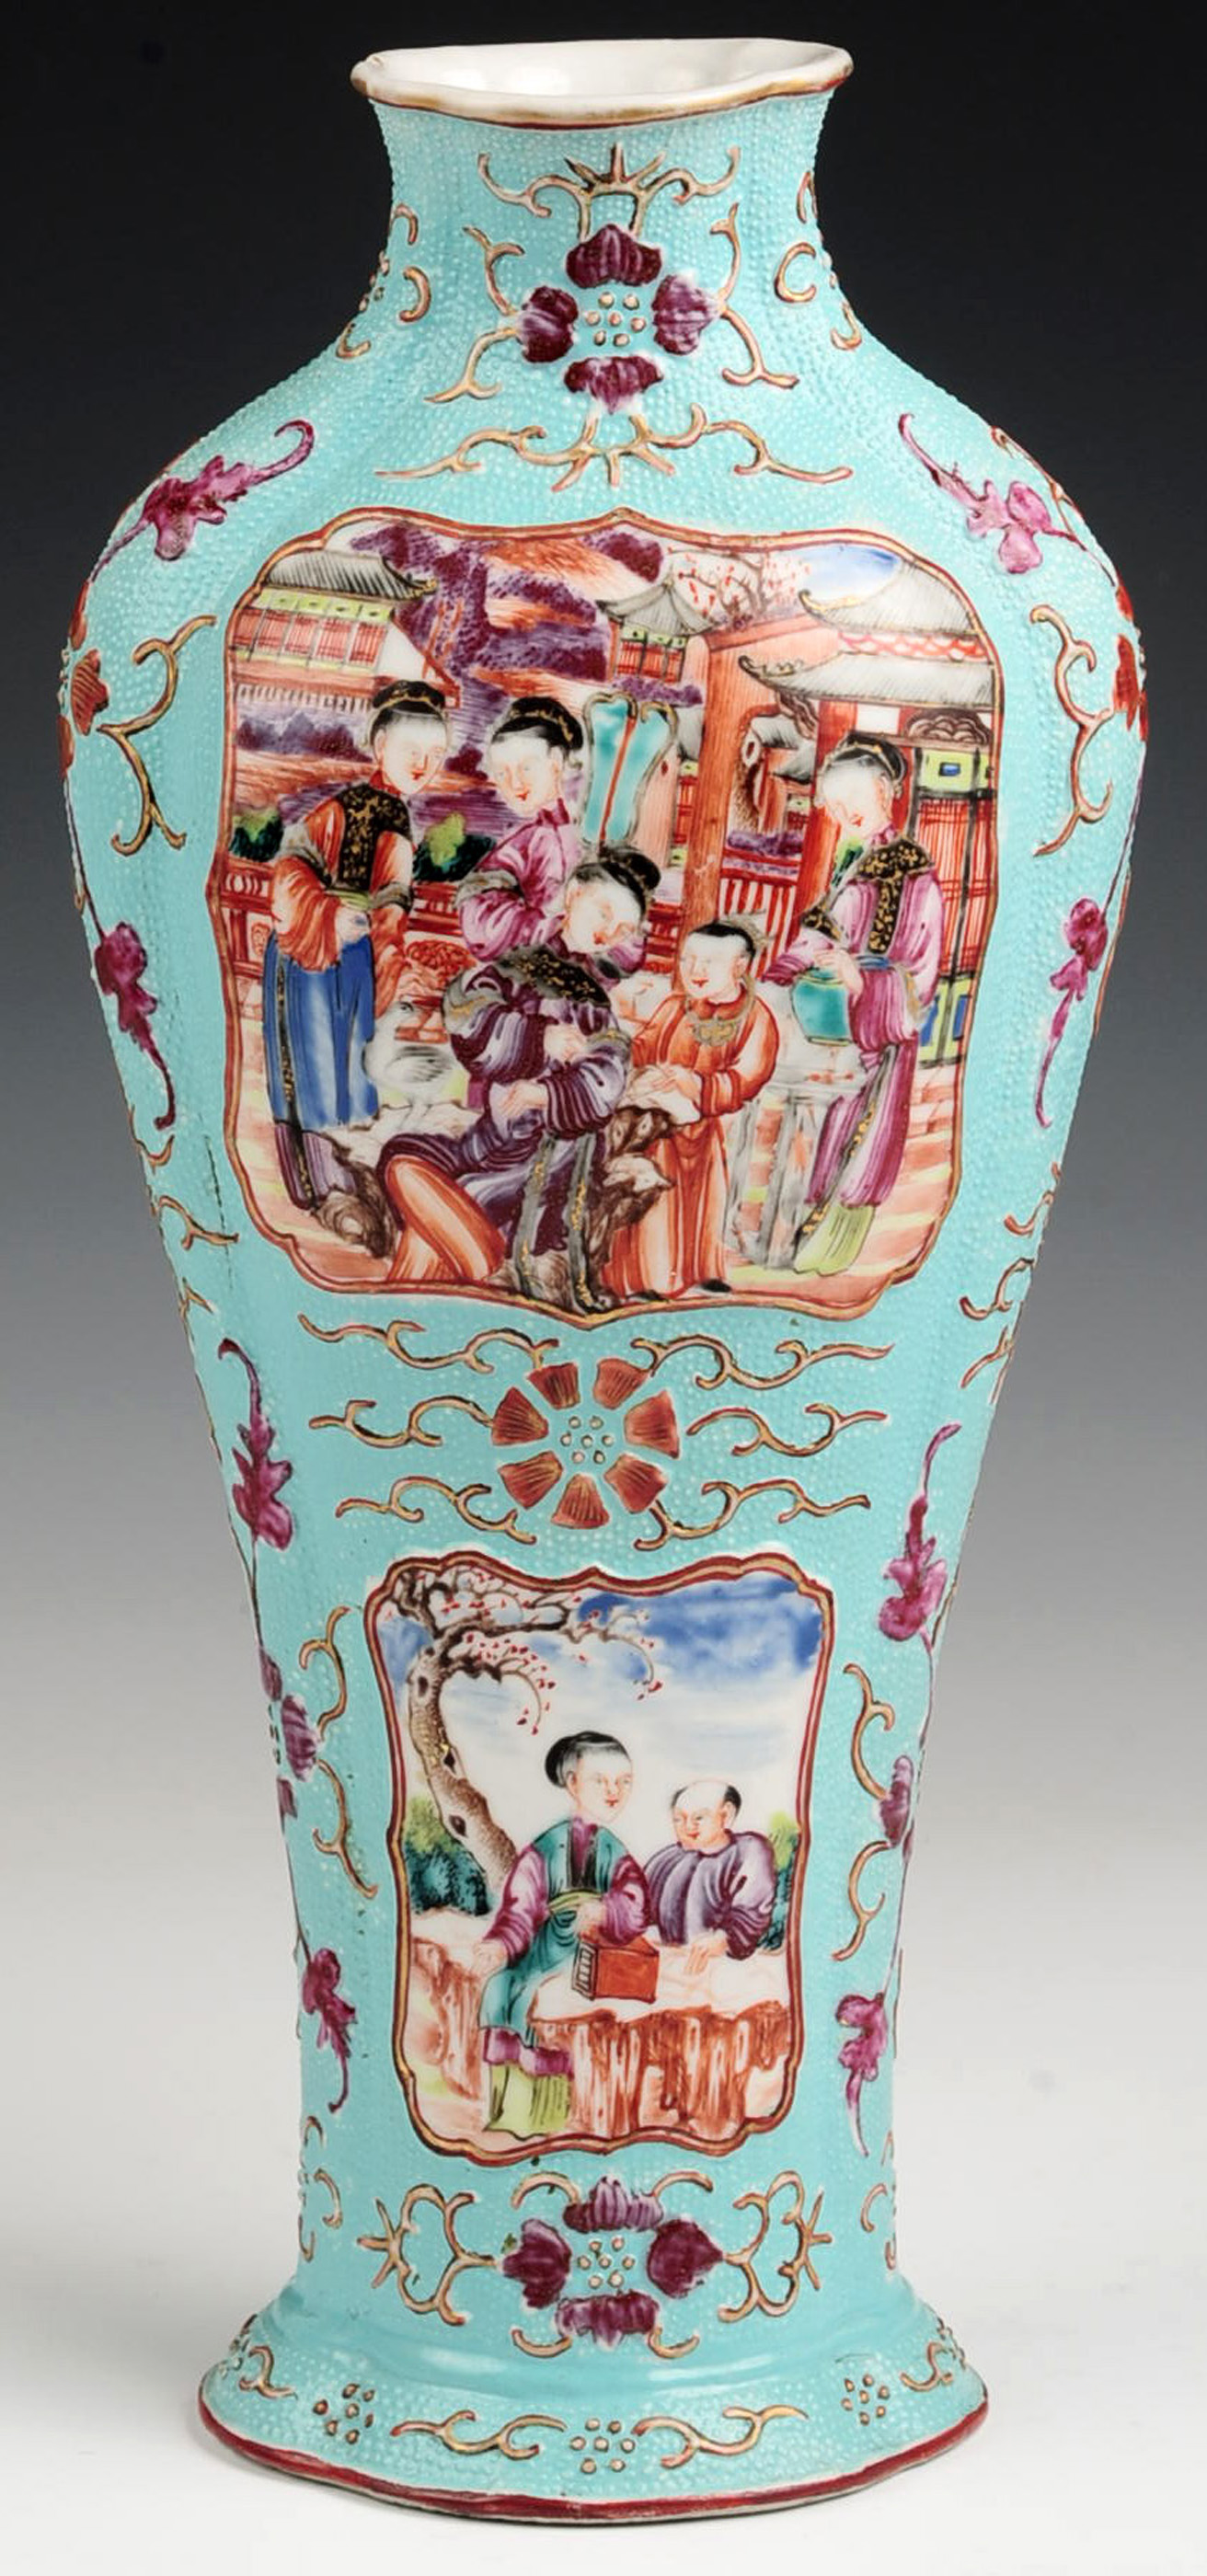 A 19TH CENTURY CHINESE EXPORT PORCELAIN VASE